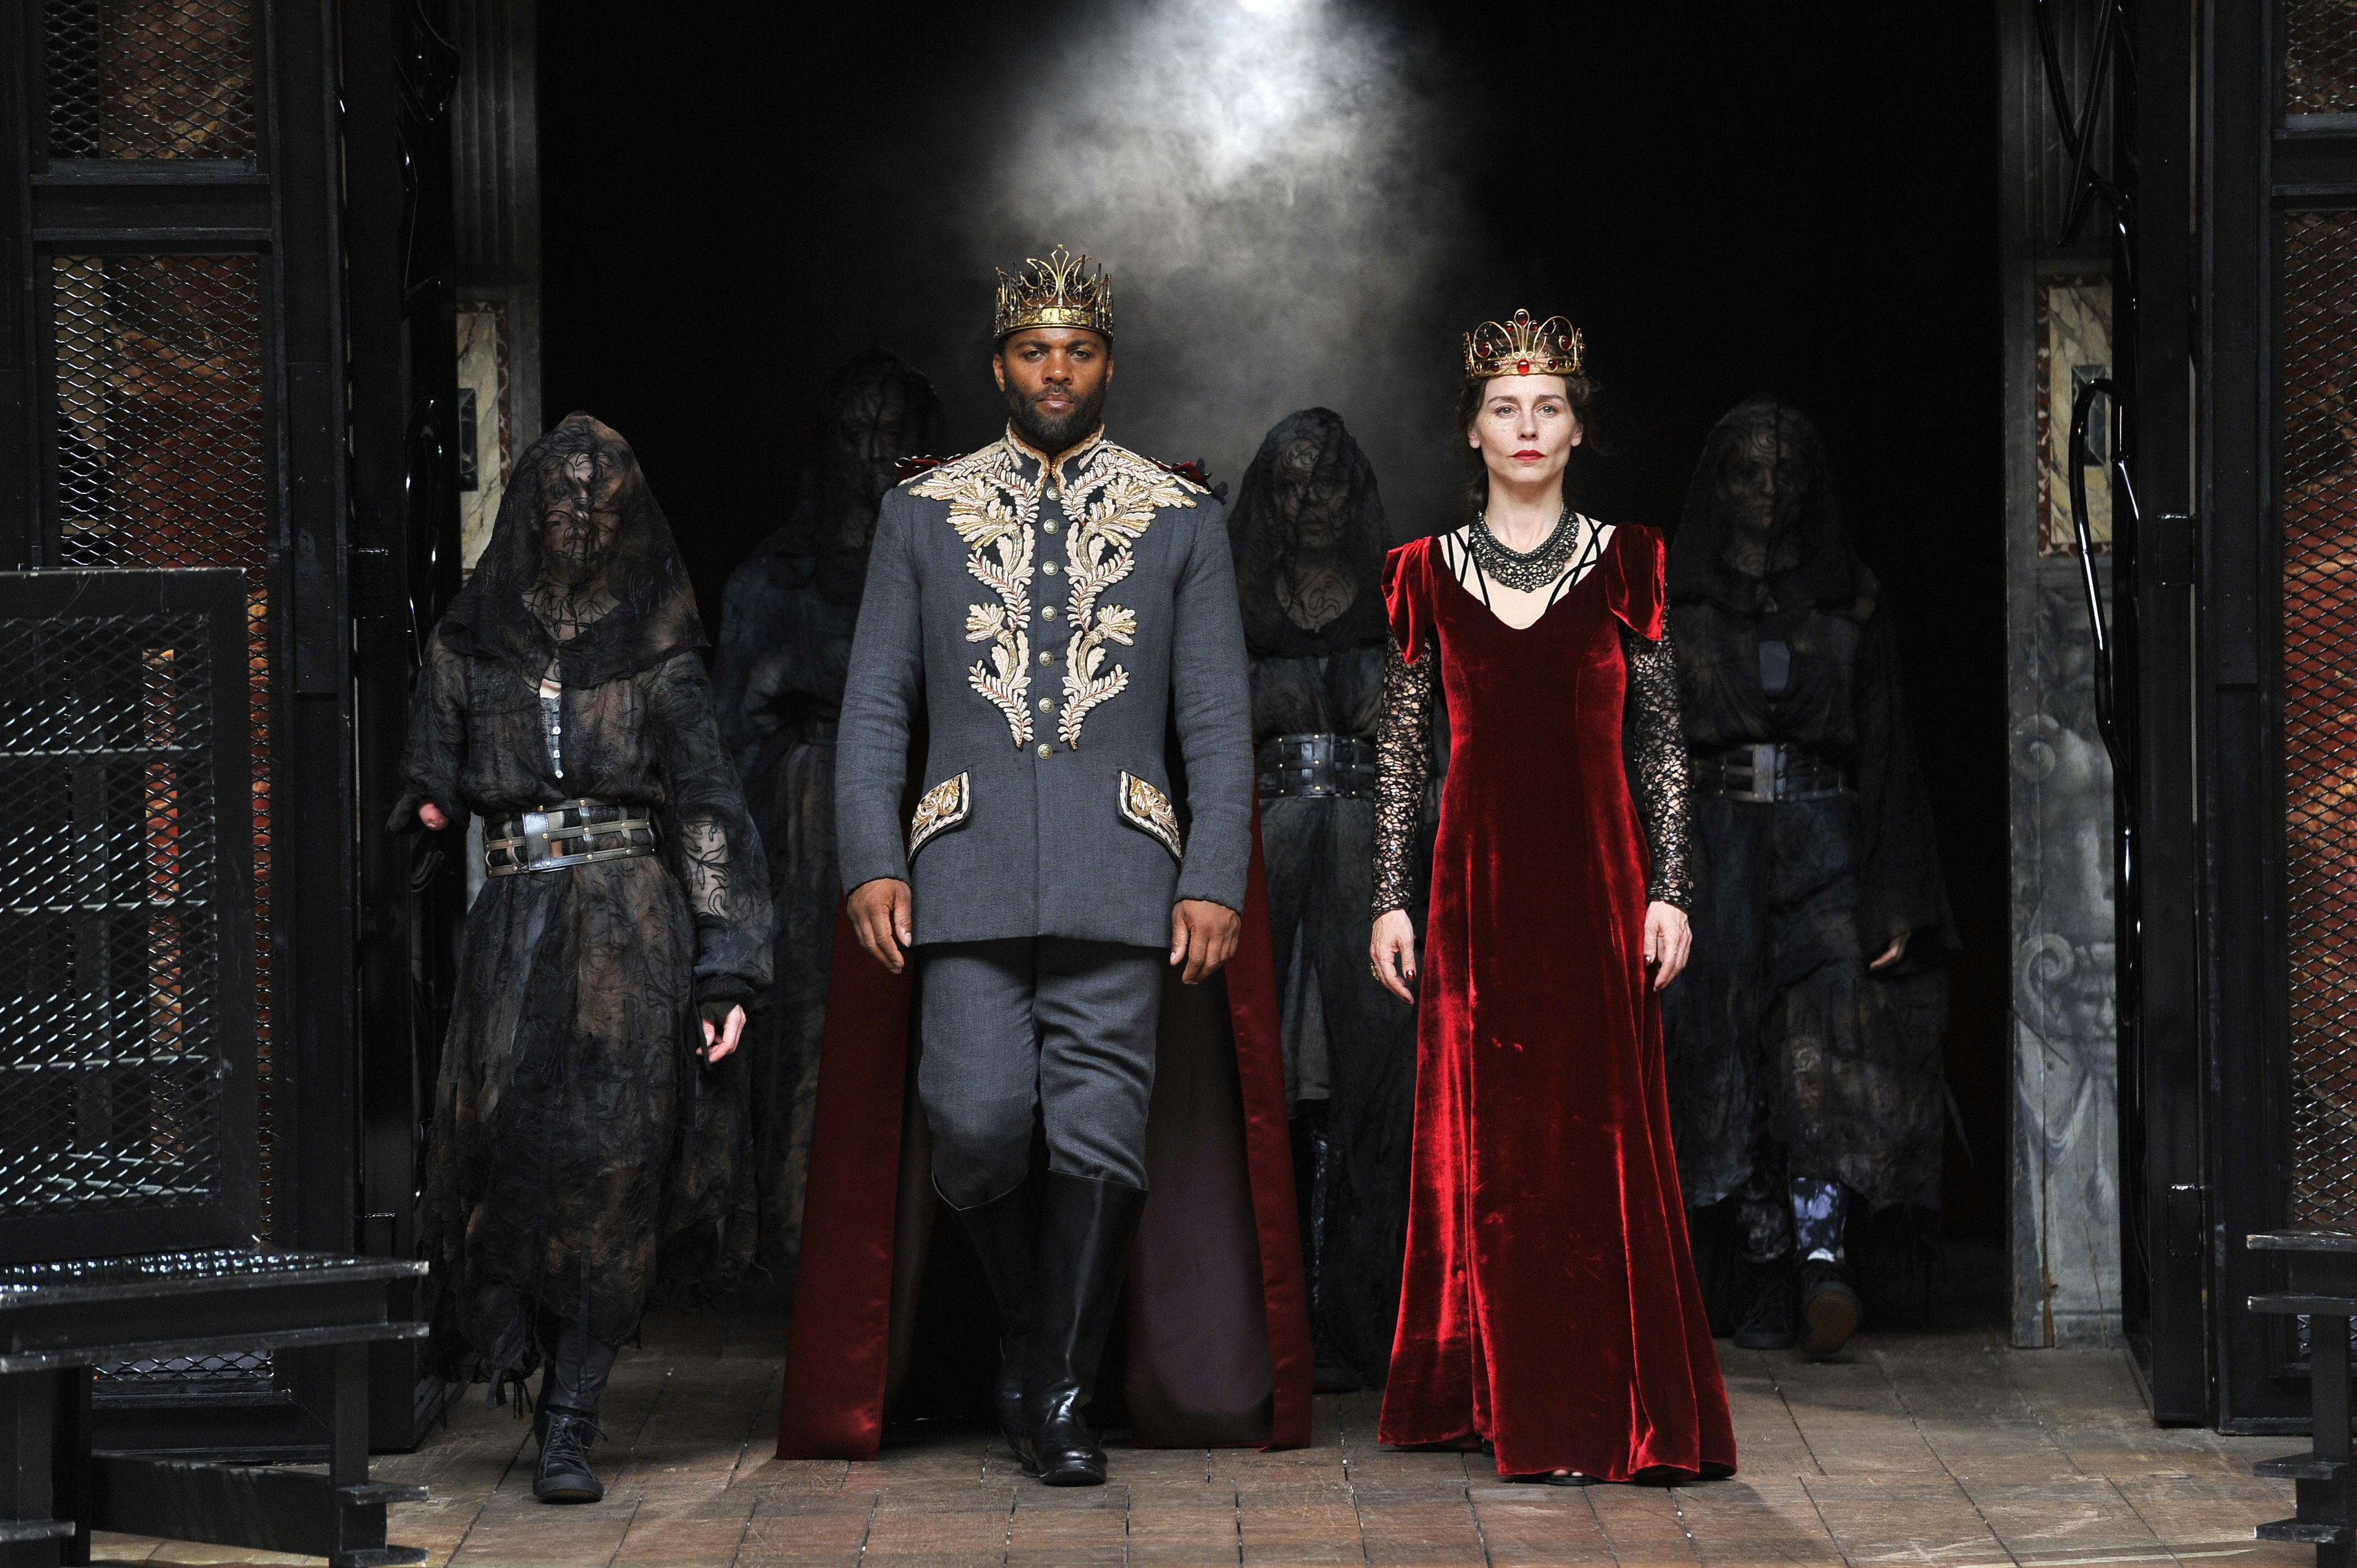 Actors playing Lord and Lady Macbeth in a production at the Globe Theatre walk on stage, in a black suit and red velvet dress respectively